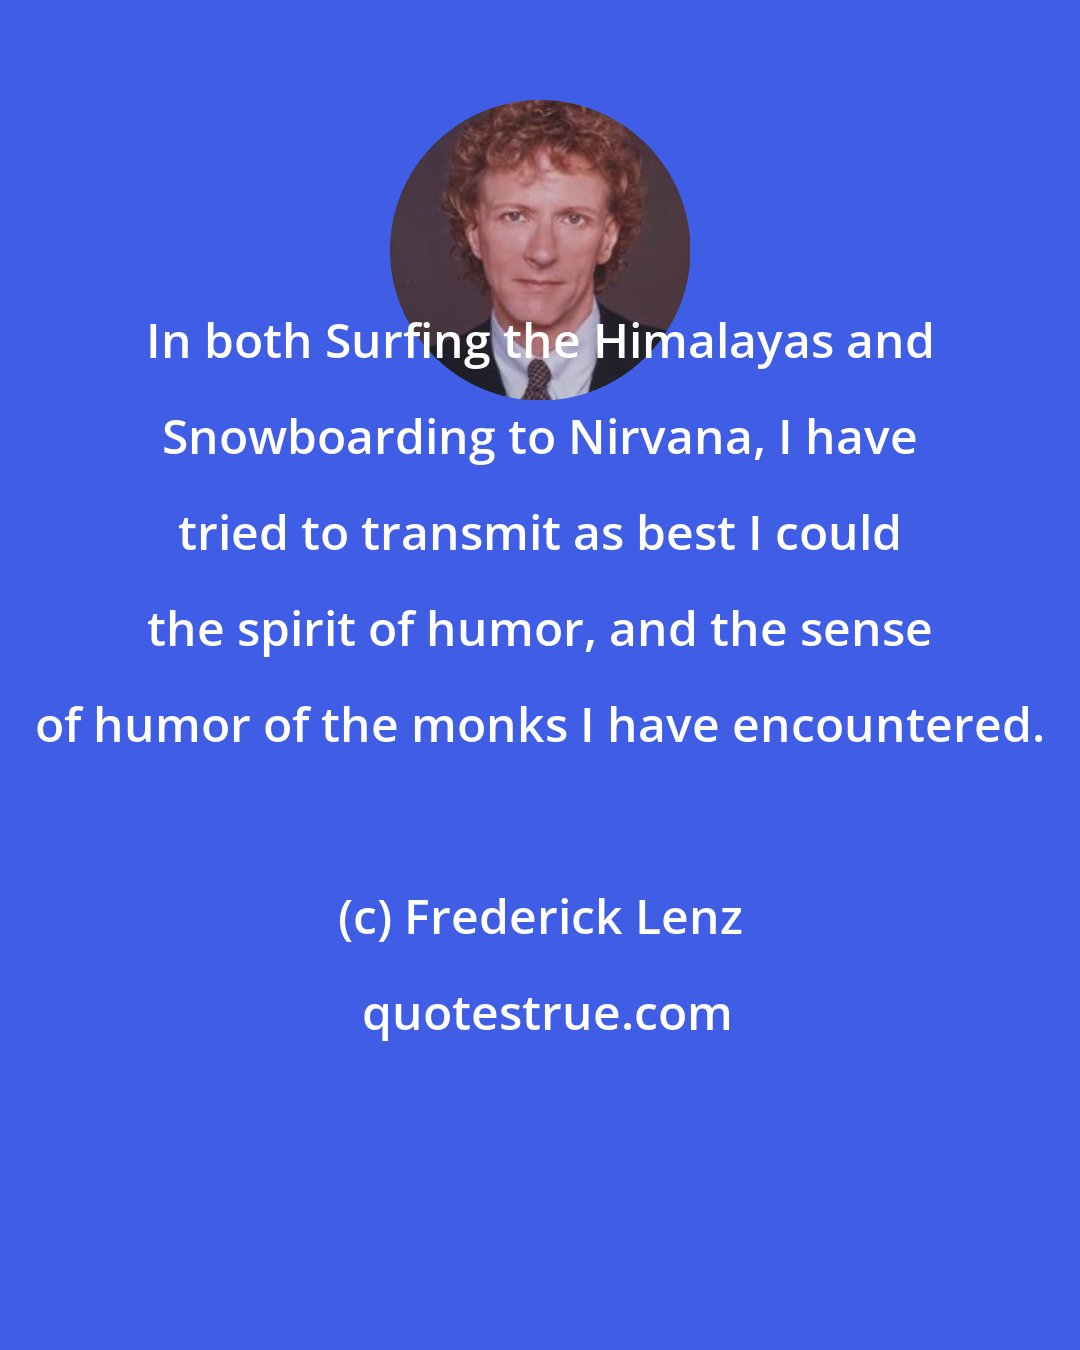 Frederick Lenz: In both Surfing the Himalayas and Snowboarding to Nirvana, I have tried to transmit as best I could the spirit of humor, and the sense of humor of the monks I have encountered.